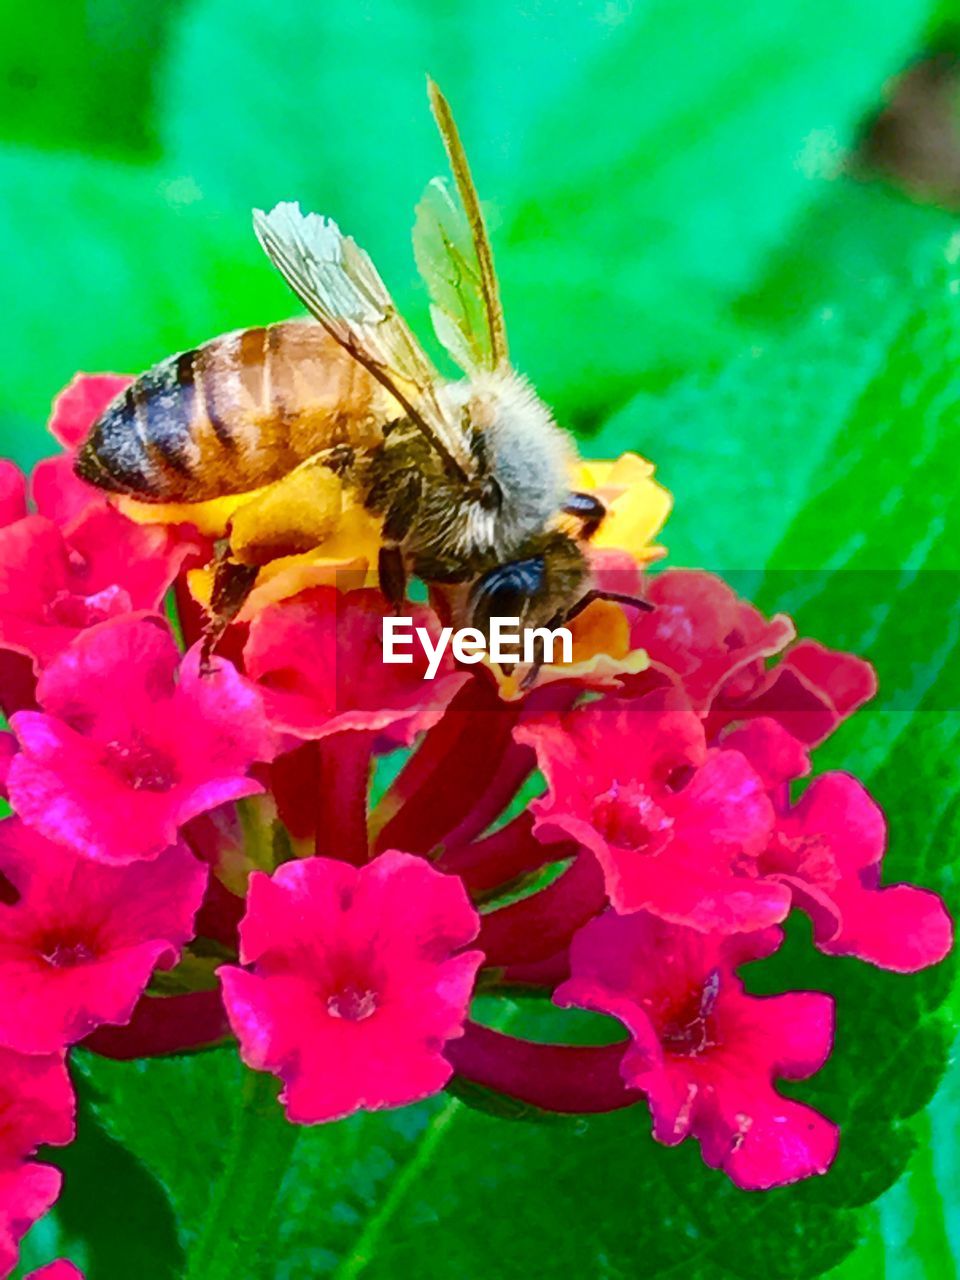 CLOSE-UP OF BEE POLLINATING ON FLOWERS